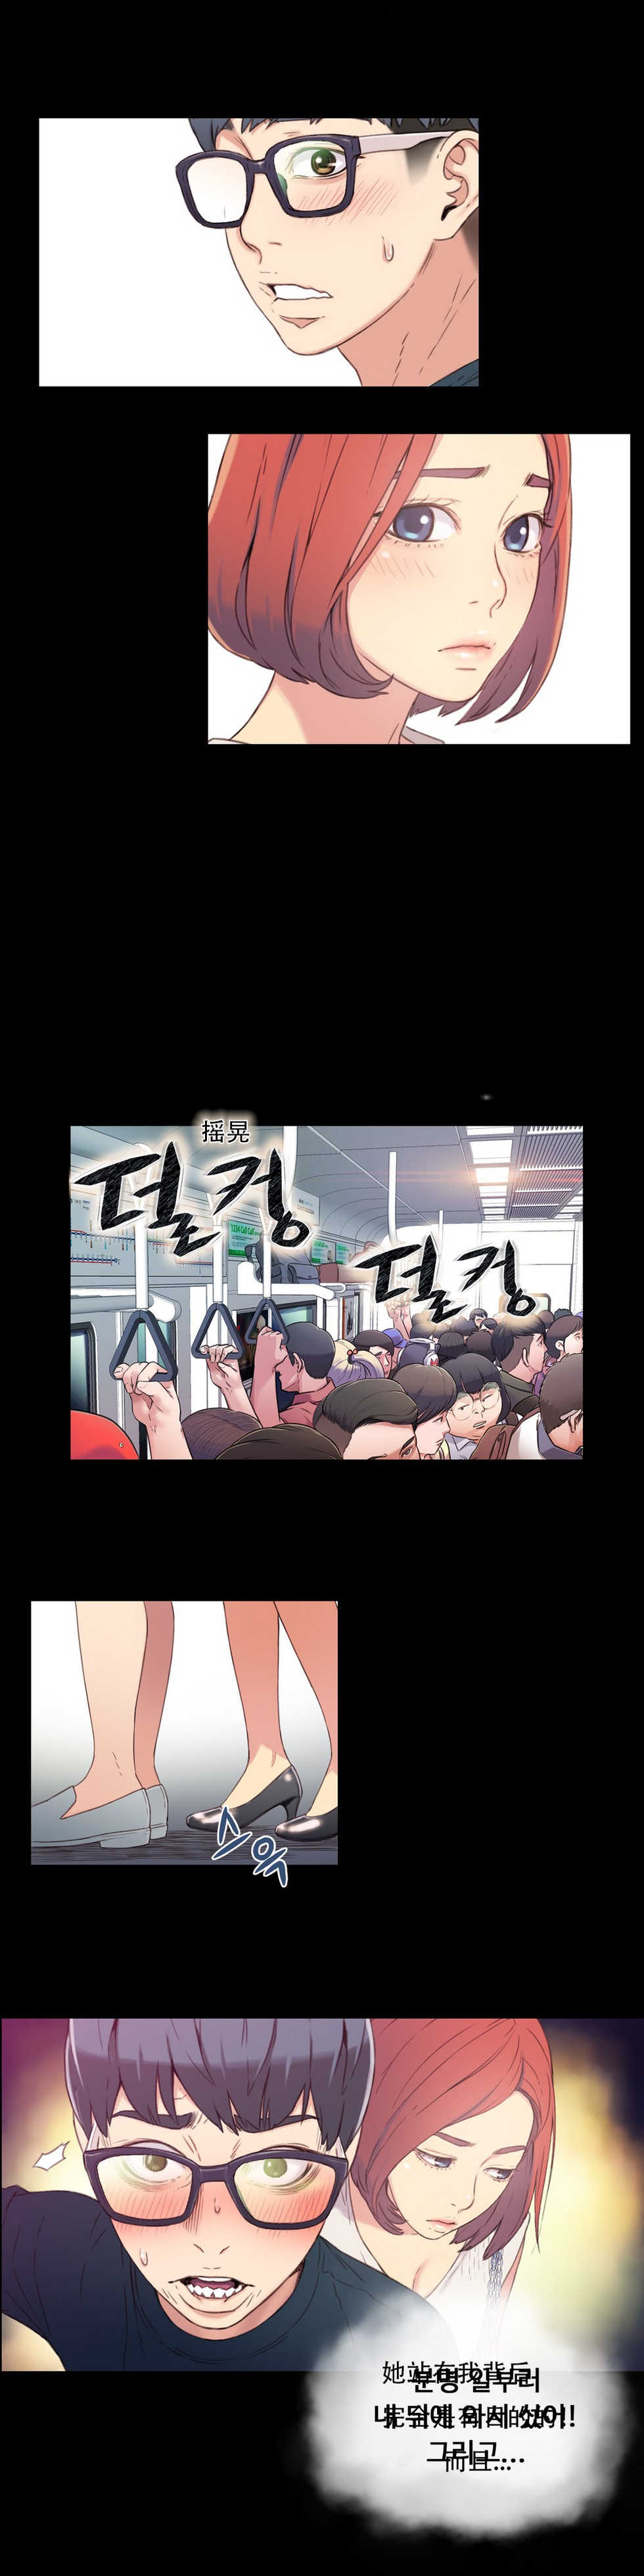 [BAK Hyeong Jun]Sweet Guy Ch.4-6(Chinese)(FITHRPG6) - Page 4